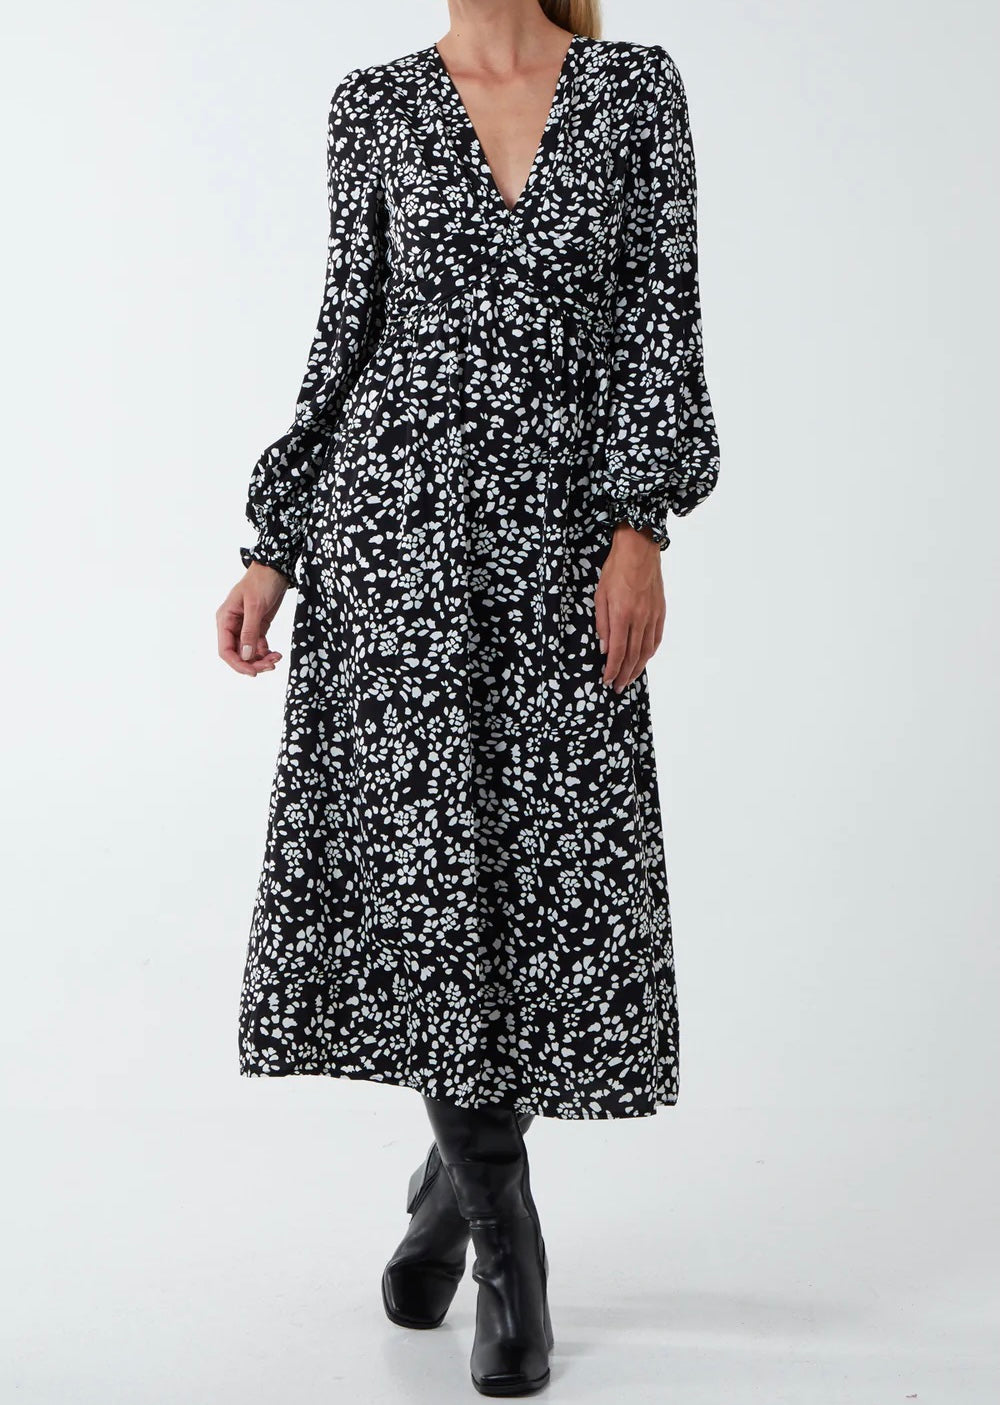 Ruched Front Detail Black And White Abstract Print V-Neck Long Sleeved Midaxi Dress